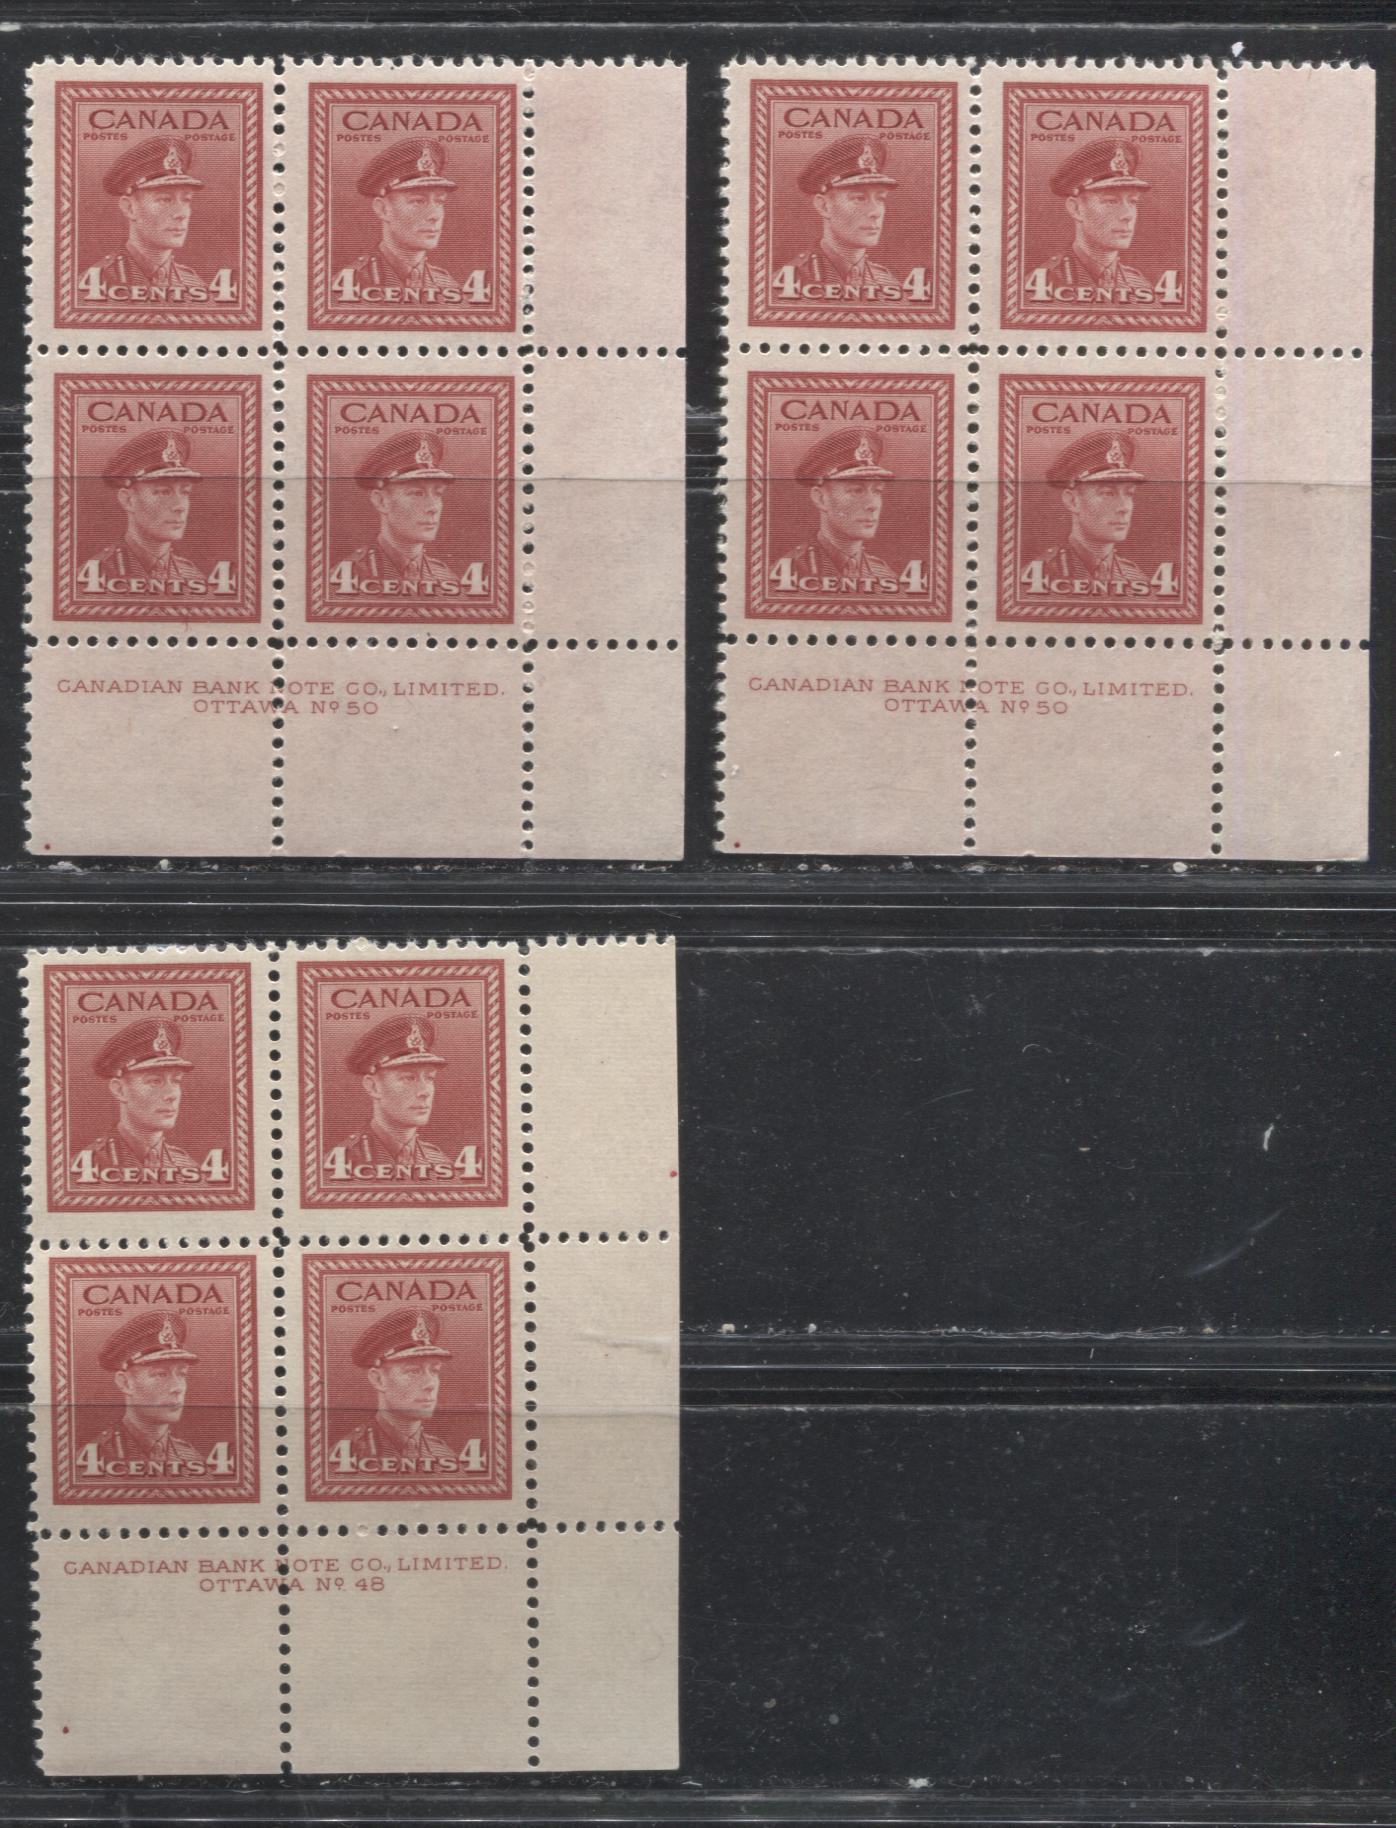 Lot 50 Canada #254 4c Carmine-Red & Rosy Carmine Red King George VI  1942-1949 War Issue, Fine NH Plate 48 & 50 Lower Right Blocks of 4 Plate Dot at LL, Showing Crack in Lower Frame